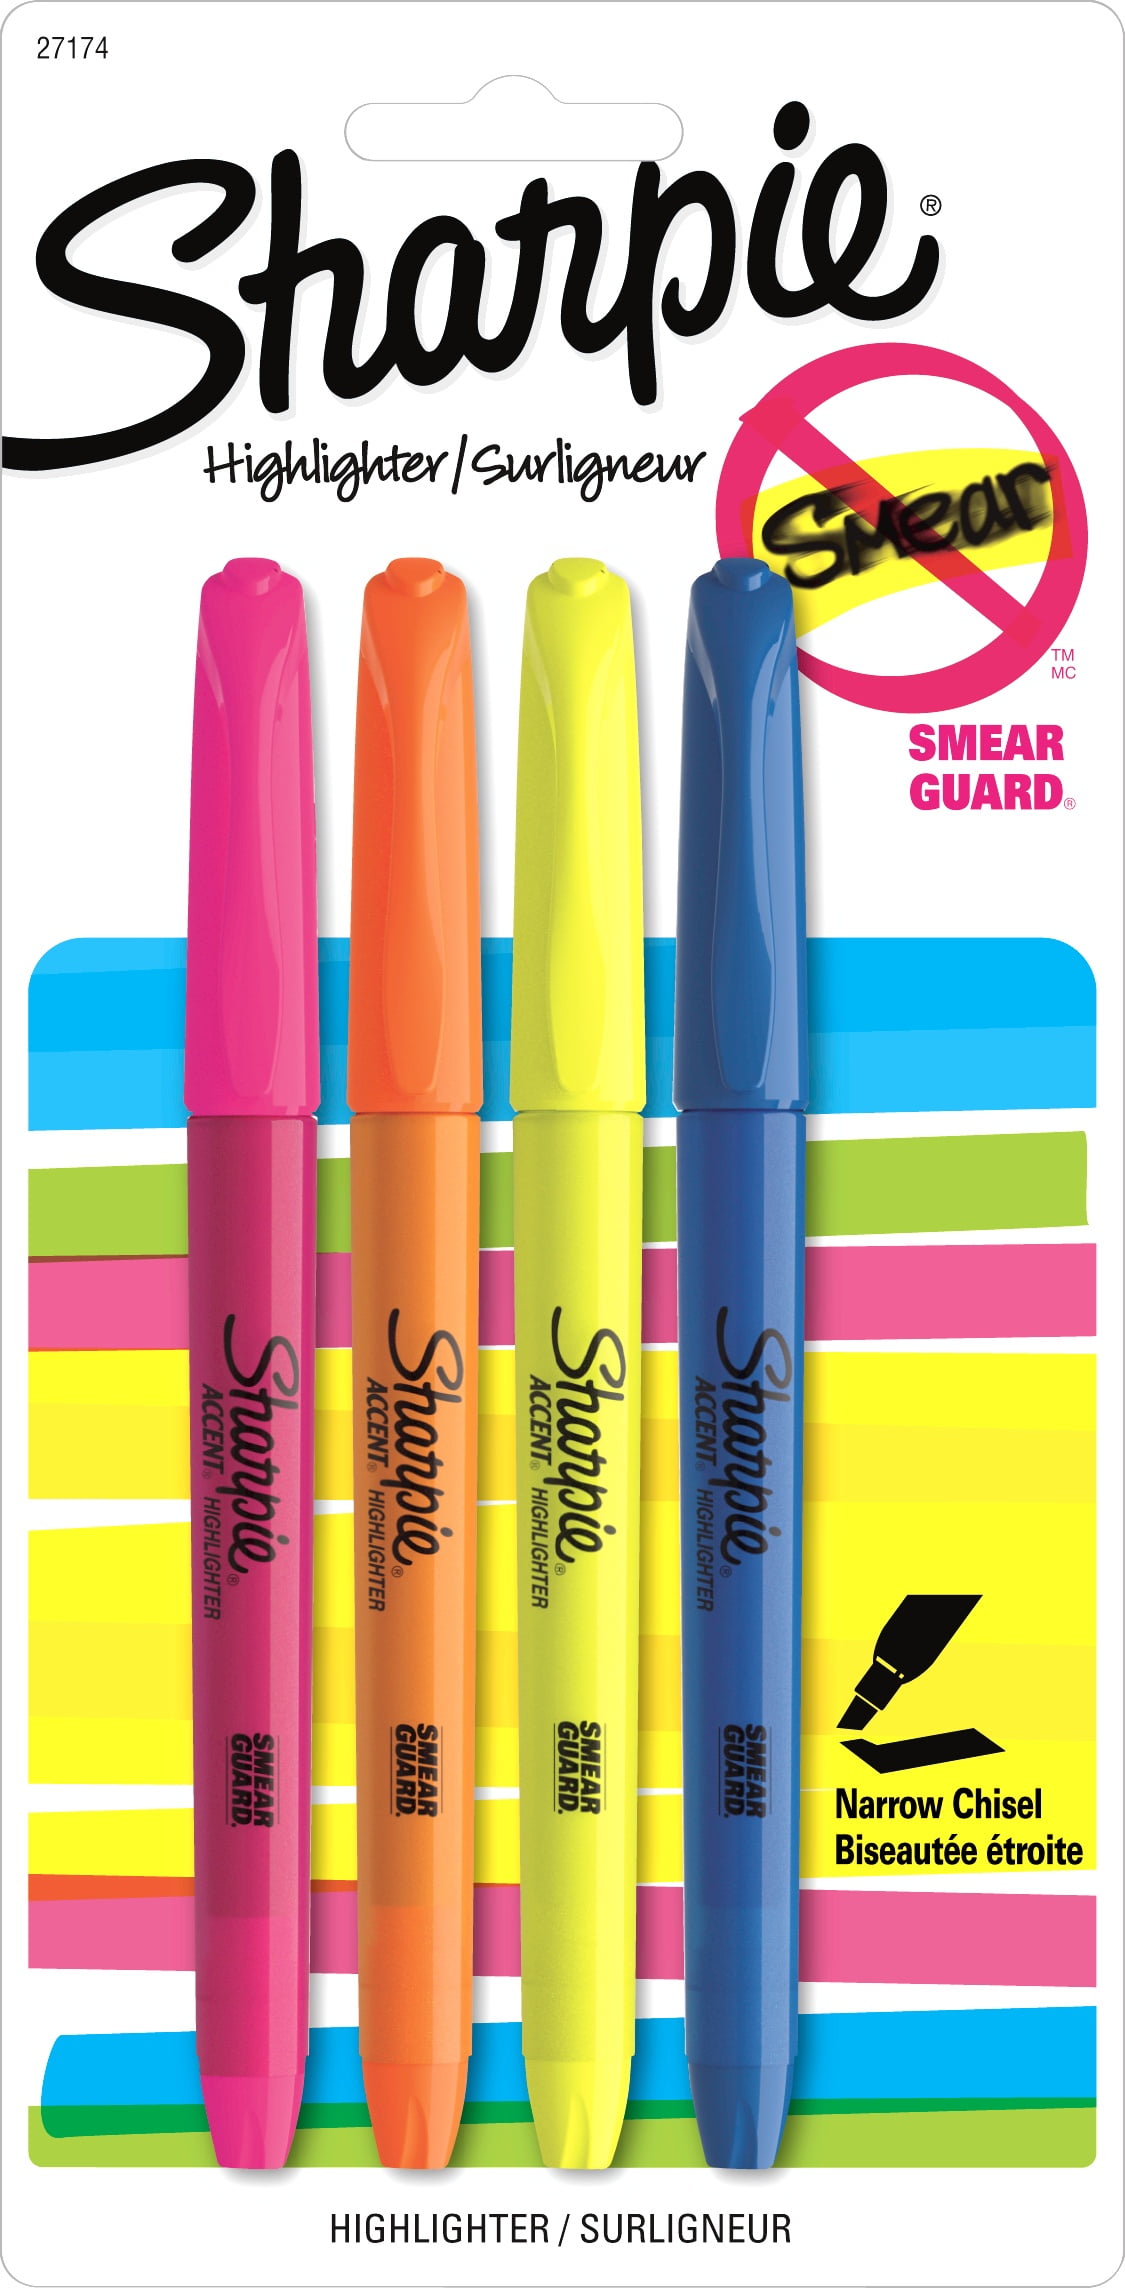 Sharpie Highlighter Coupons! Best Prices and Cheap Deals!